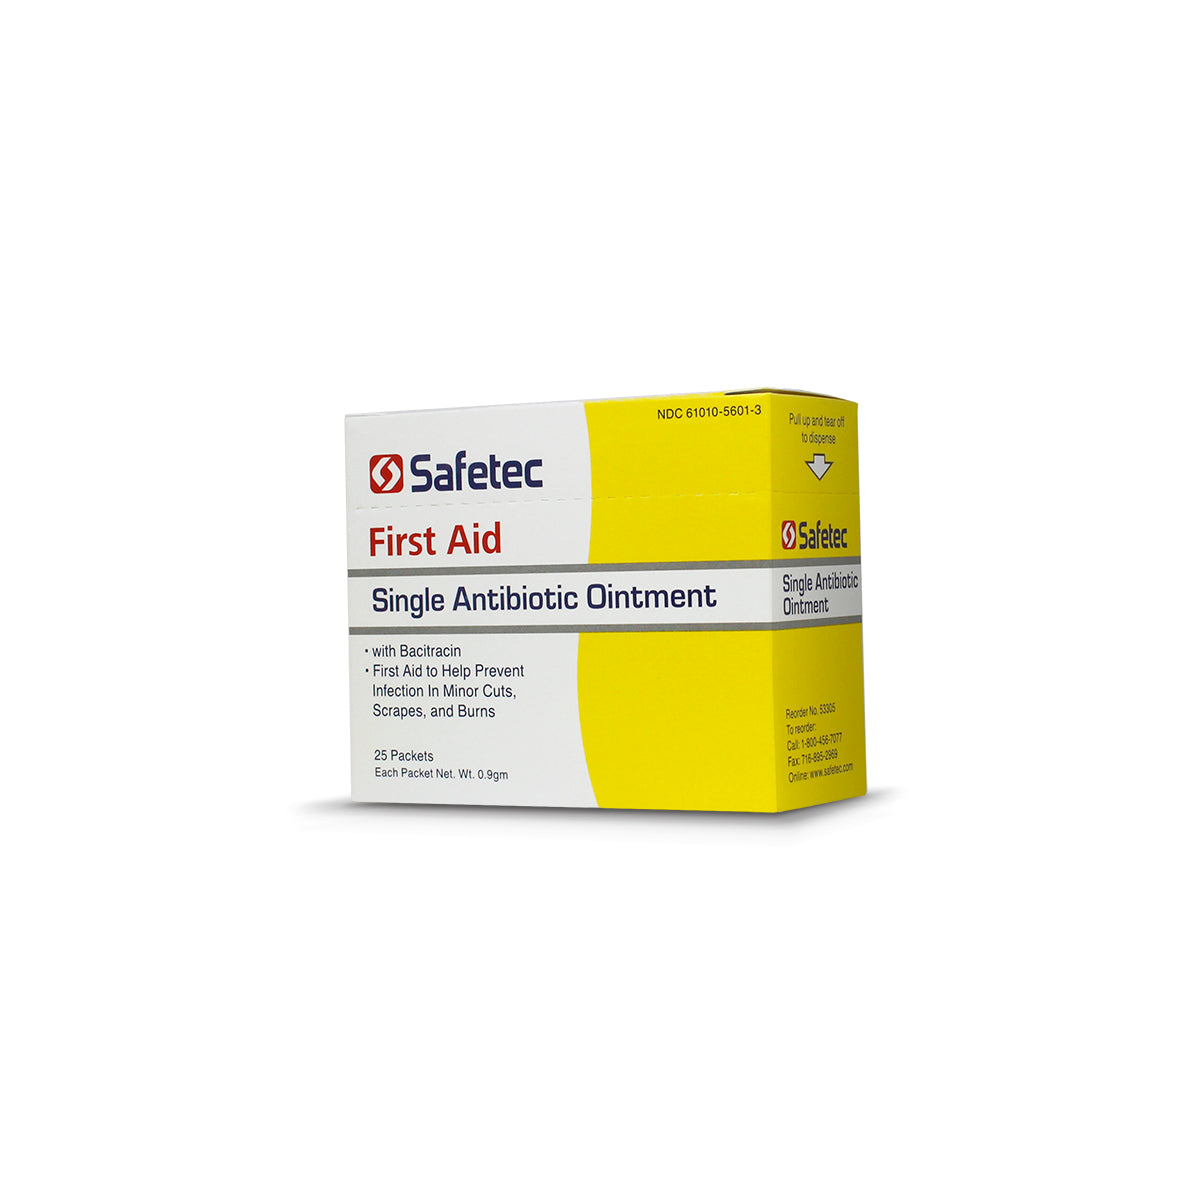 SafeTec - Single Antibiotic Ointment (Bacitracin)- .9g pouch data-zoom=